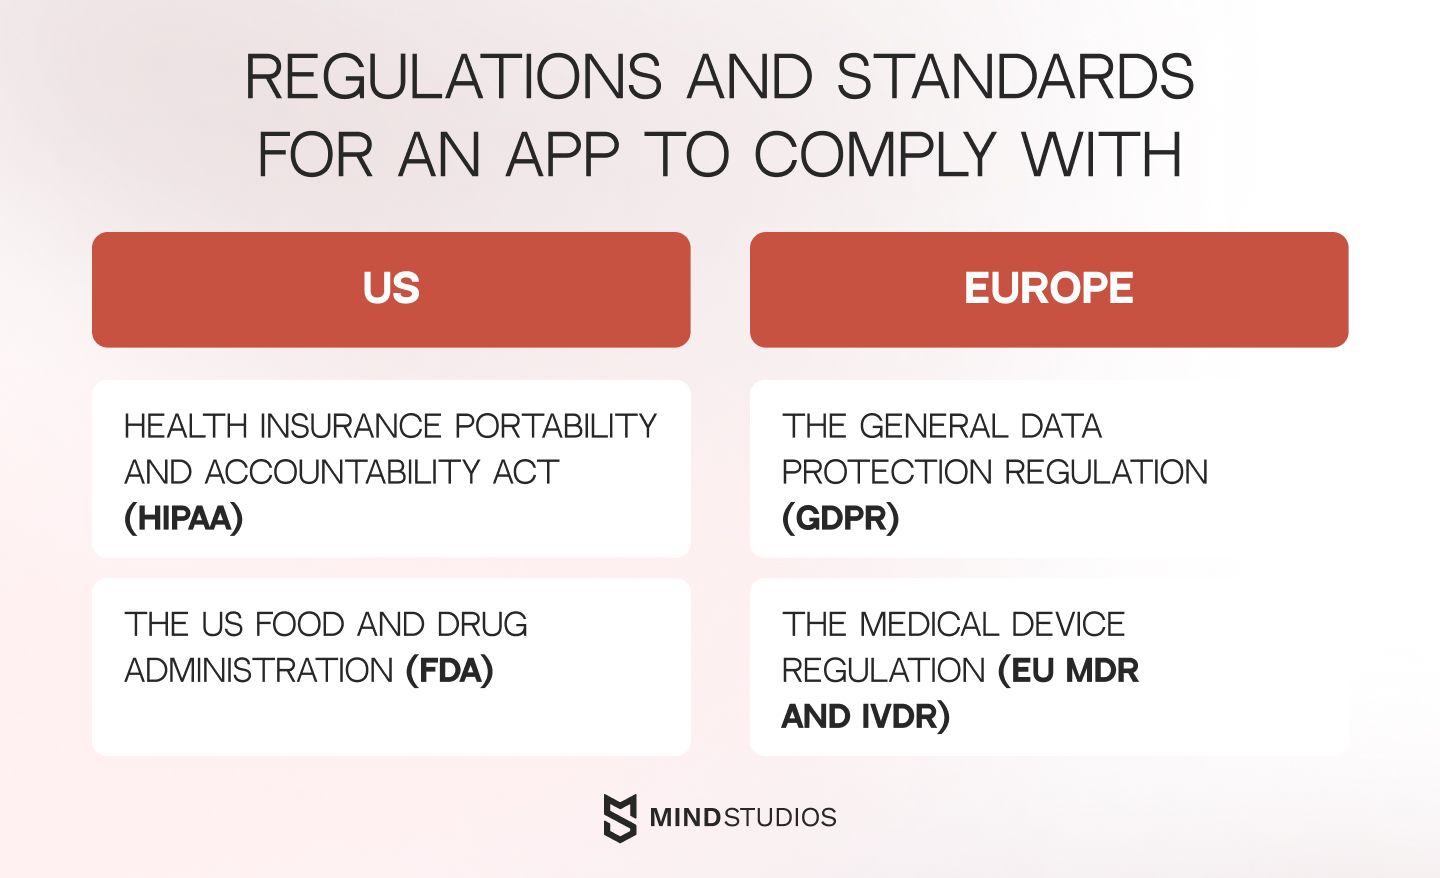 Regulations and standards for app to comply with